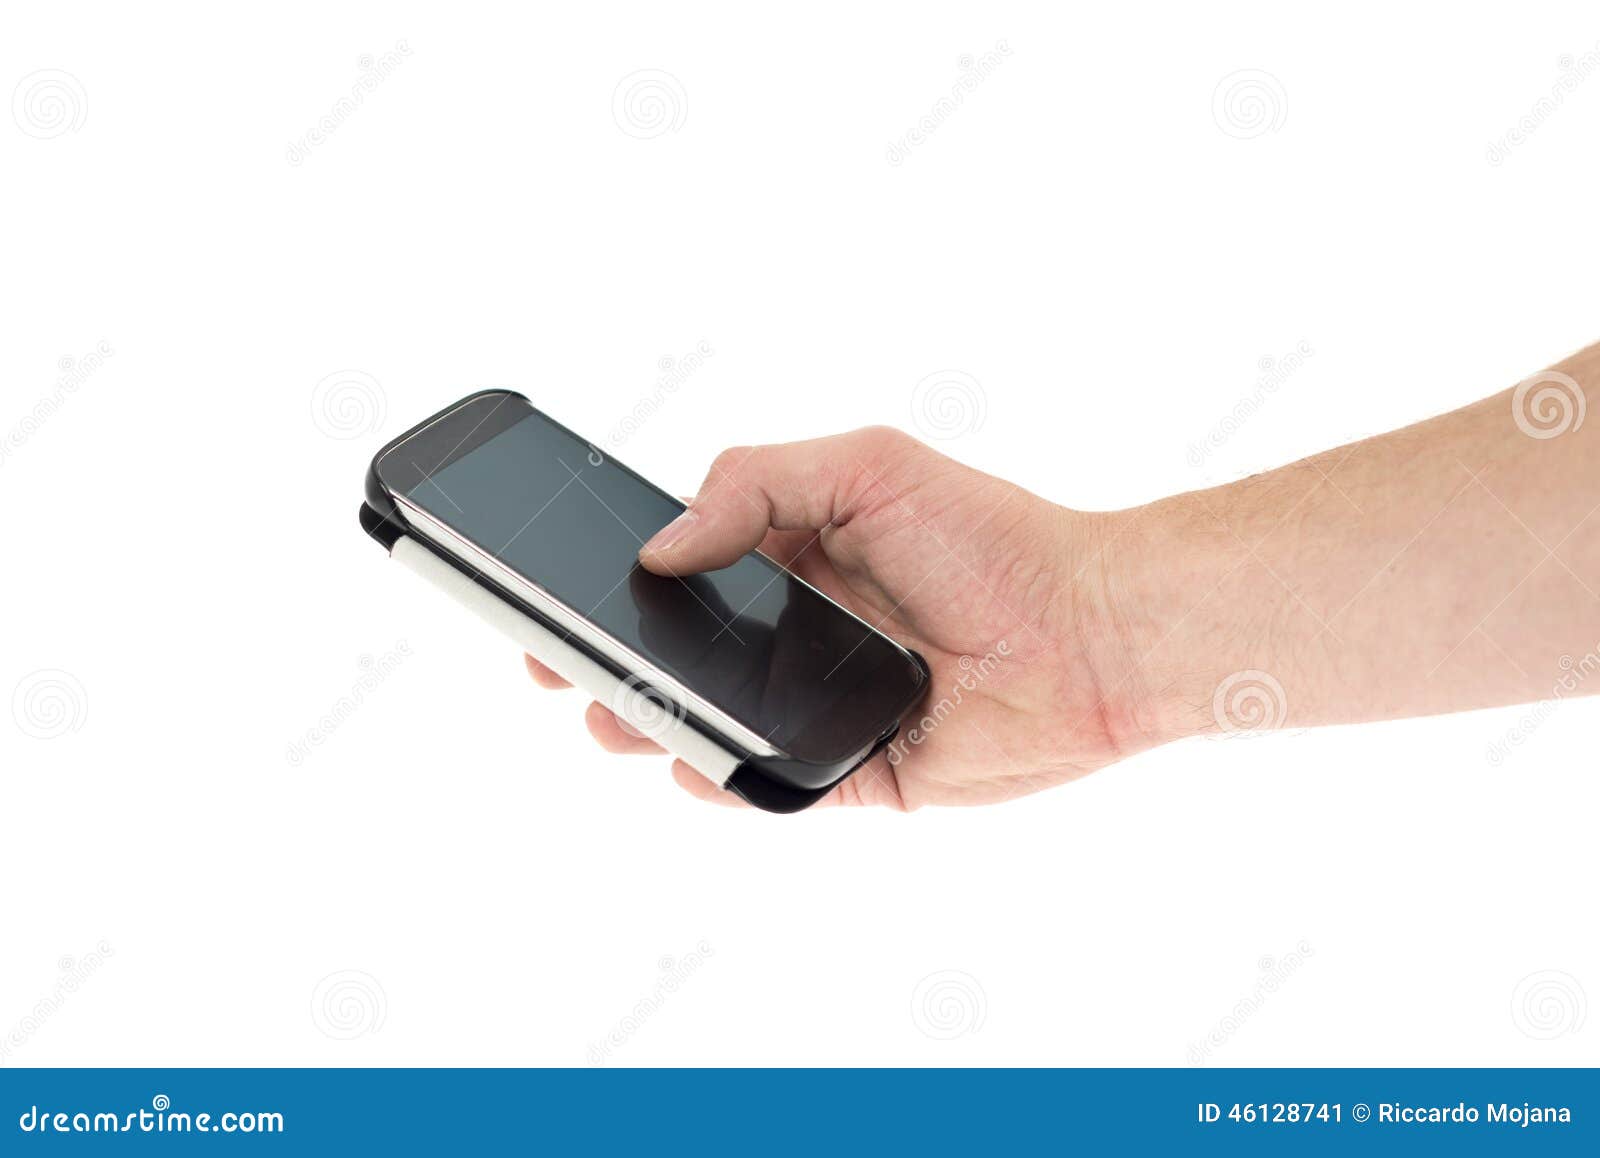 Hand using a smartphone stock image. Image of holding - 46128741